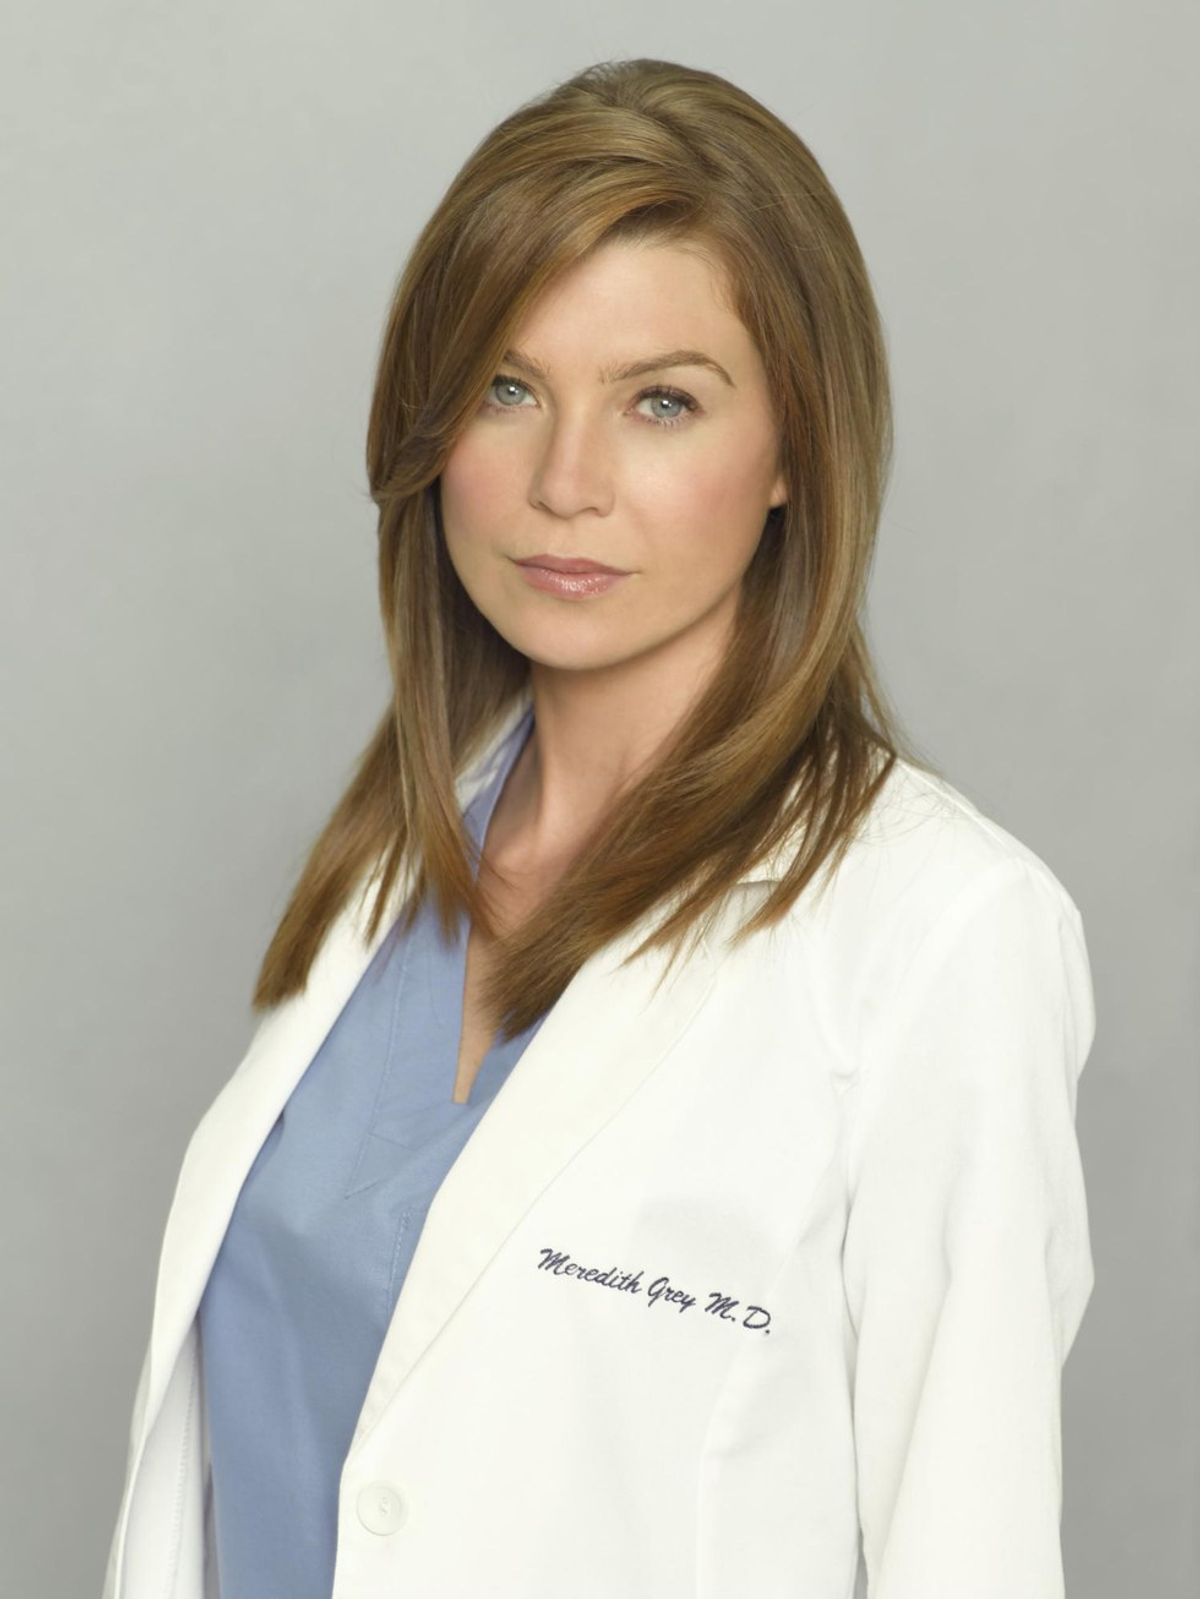 Why Meredith Grey Is An Extraordinary Person